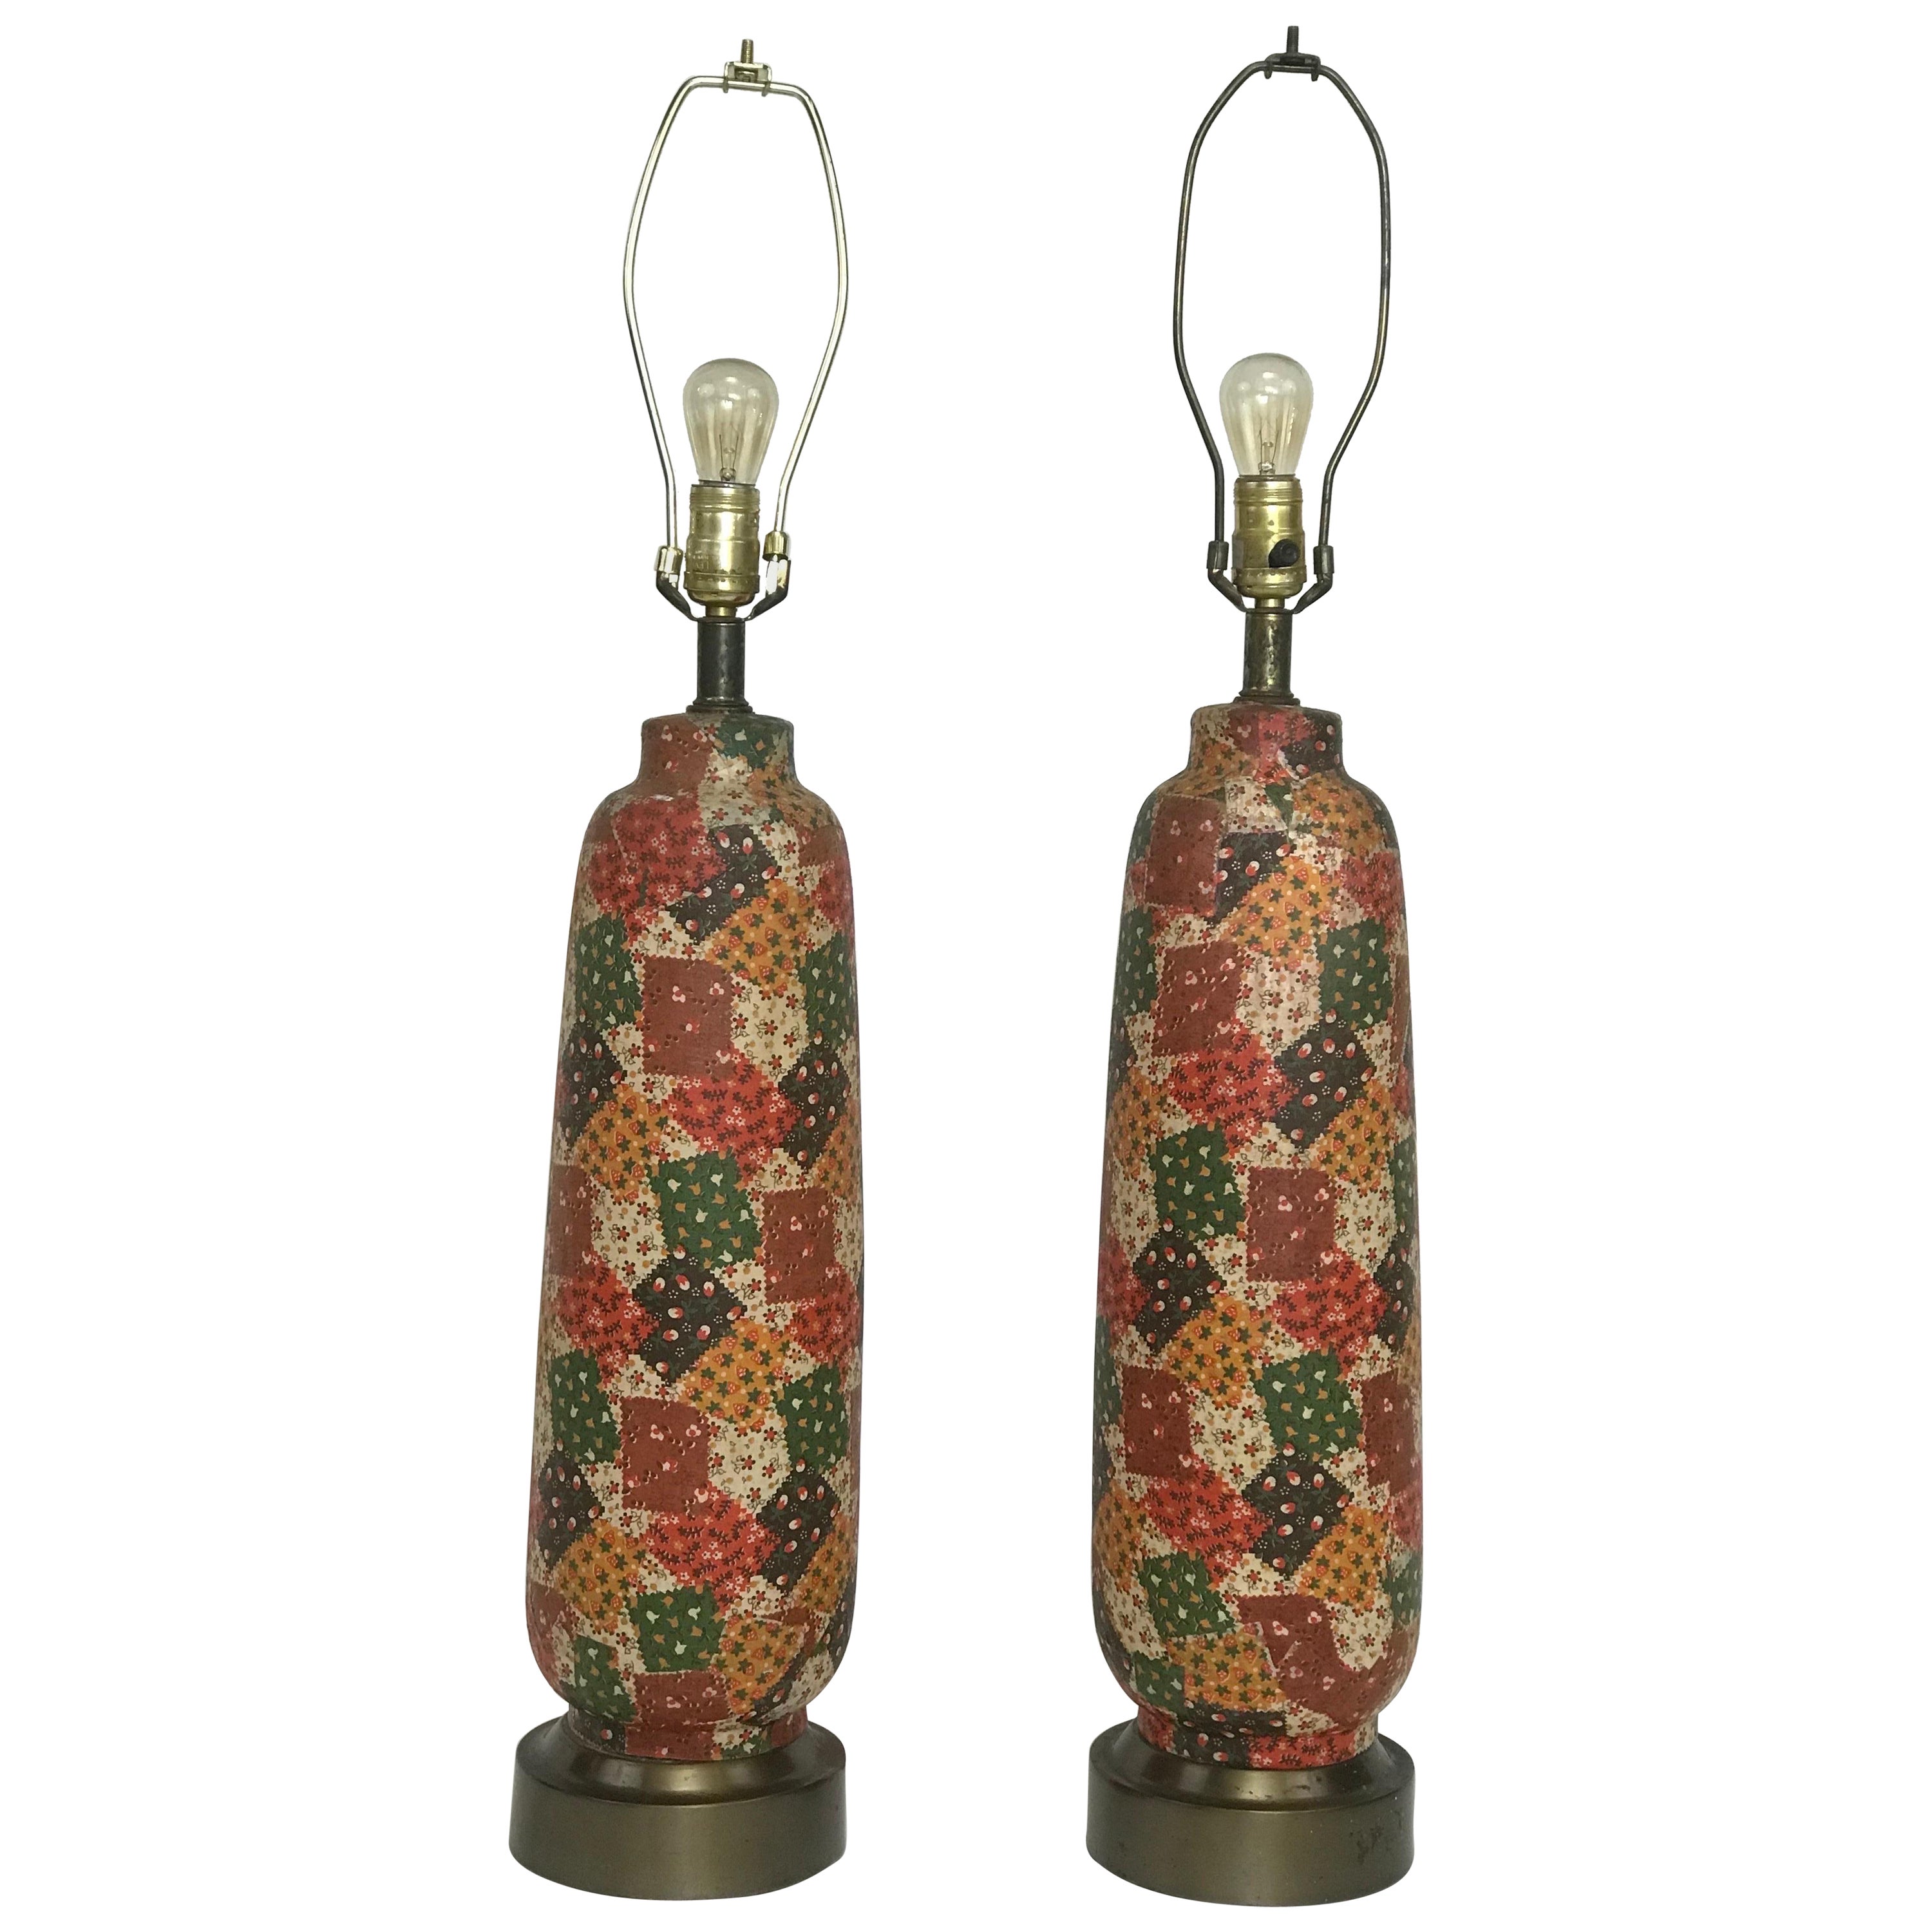 A Pair of 1970’s Spun Metal Table Lamps in a Printed Patchwork Theme Finish  For Sale